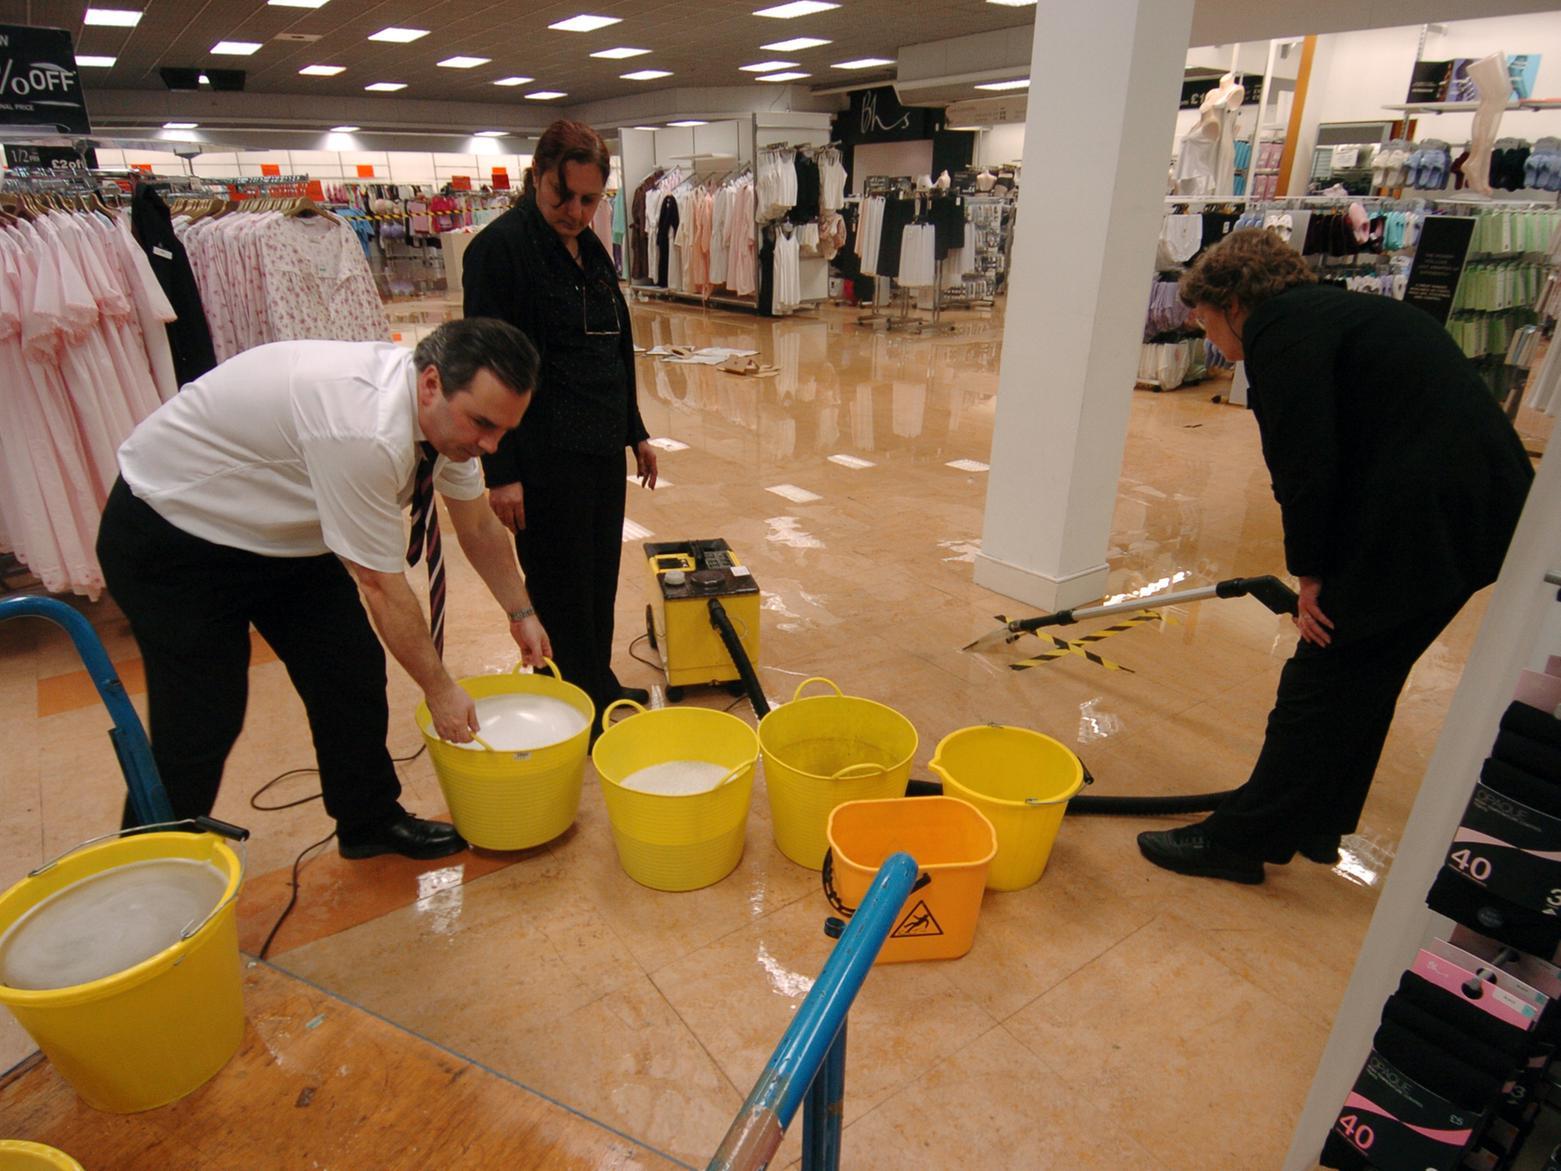 Staff at BHS in Kirkstall mop up the flooded shop floor after the River Aire burst its banks.